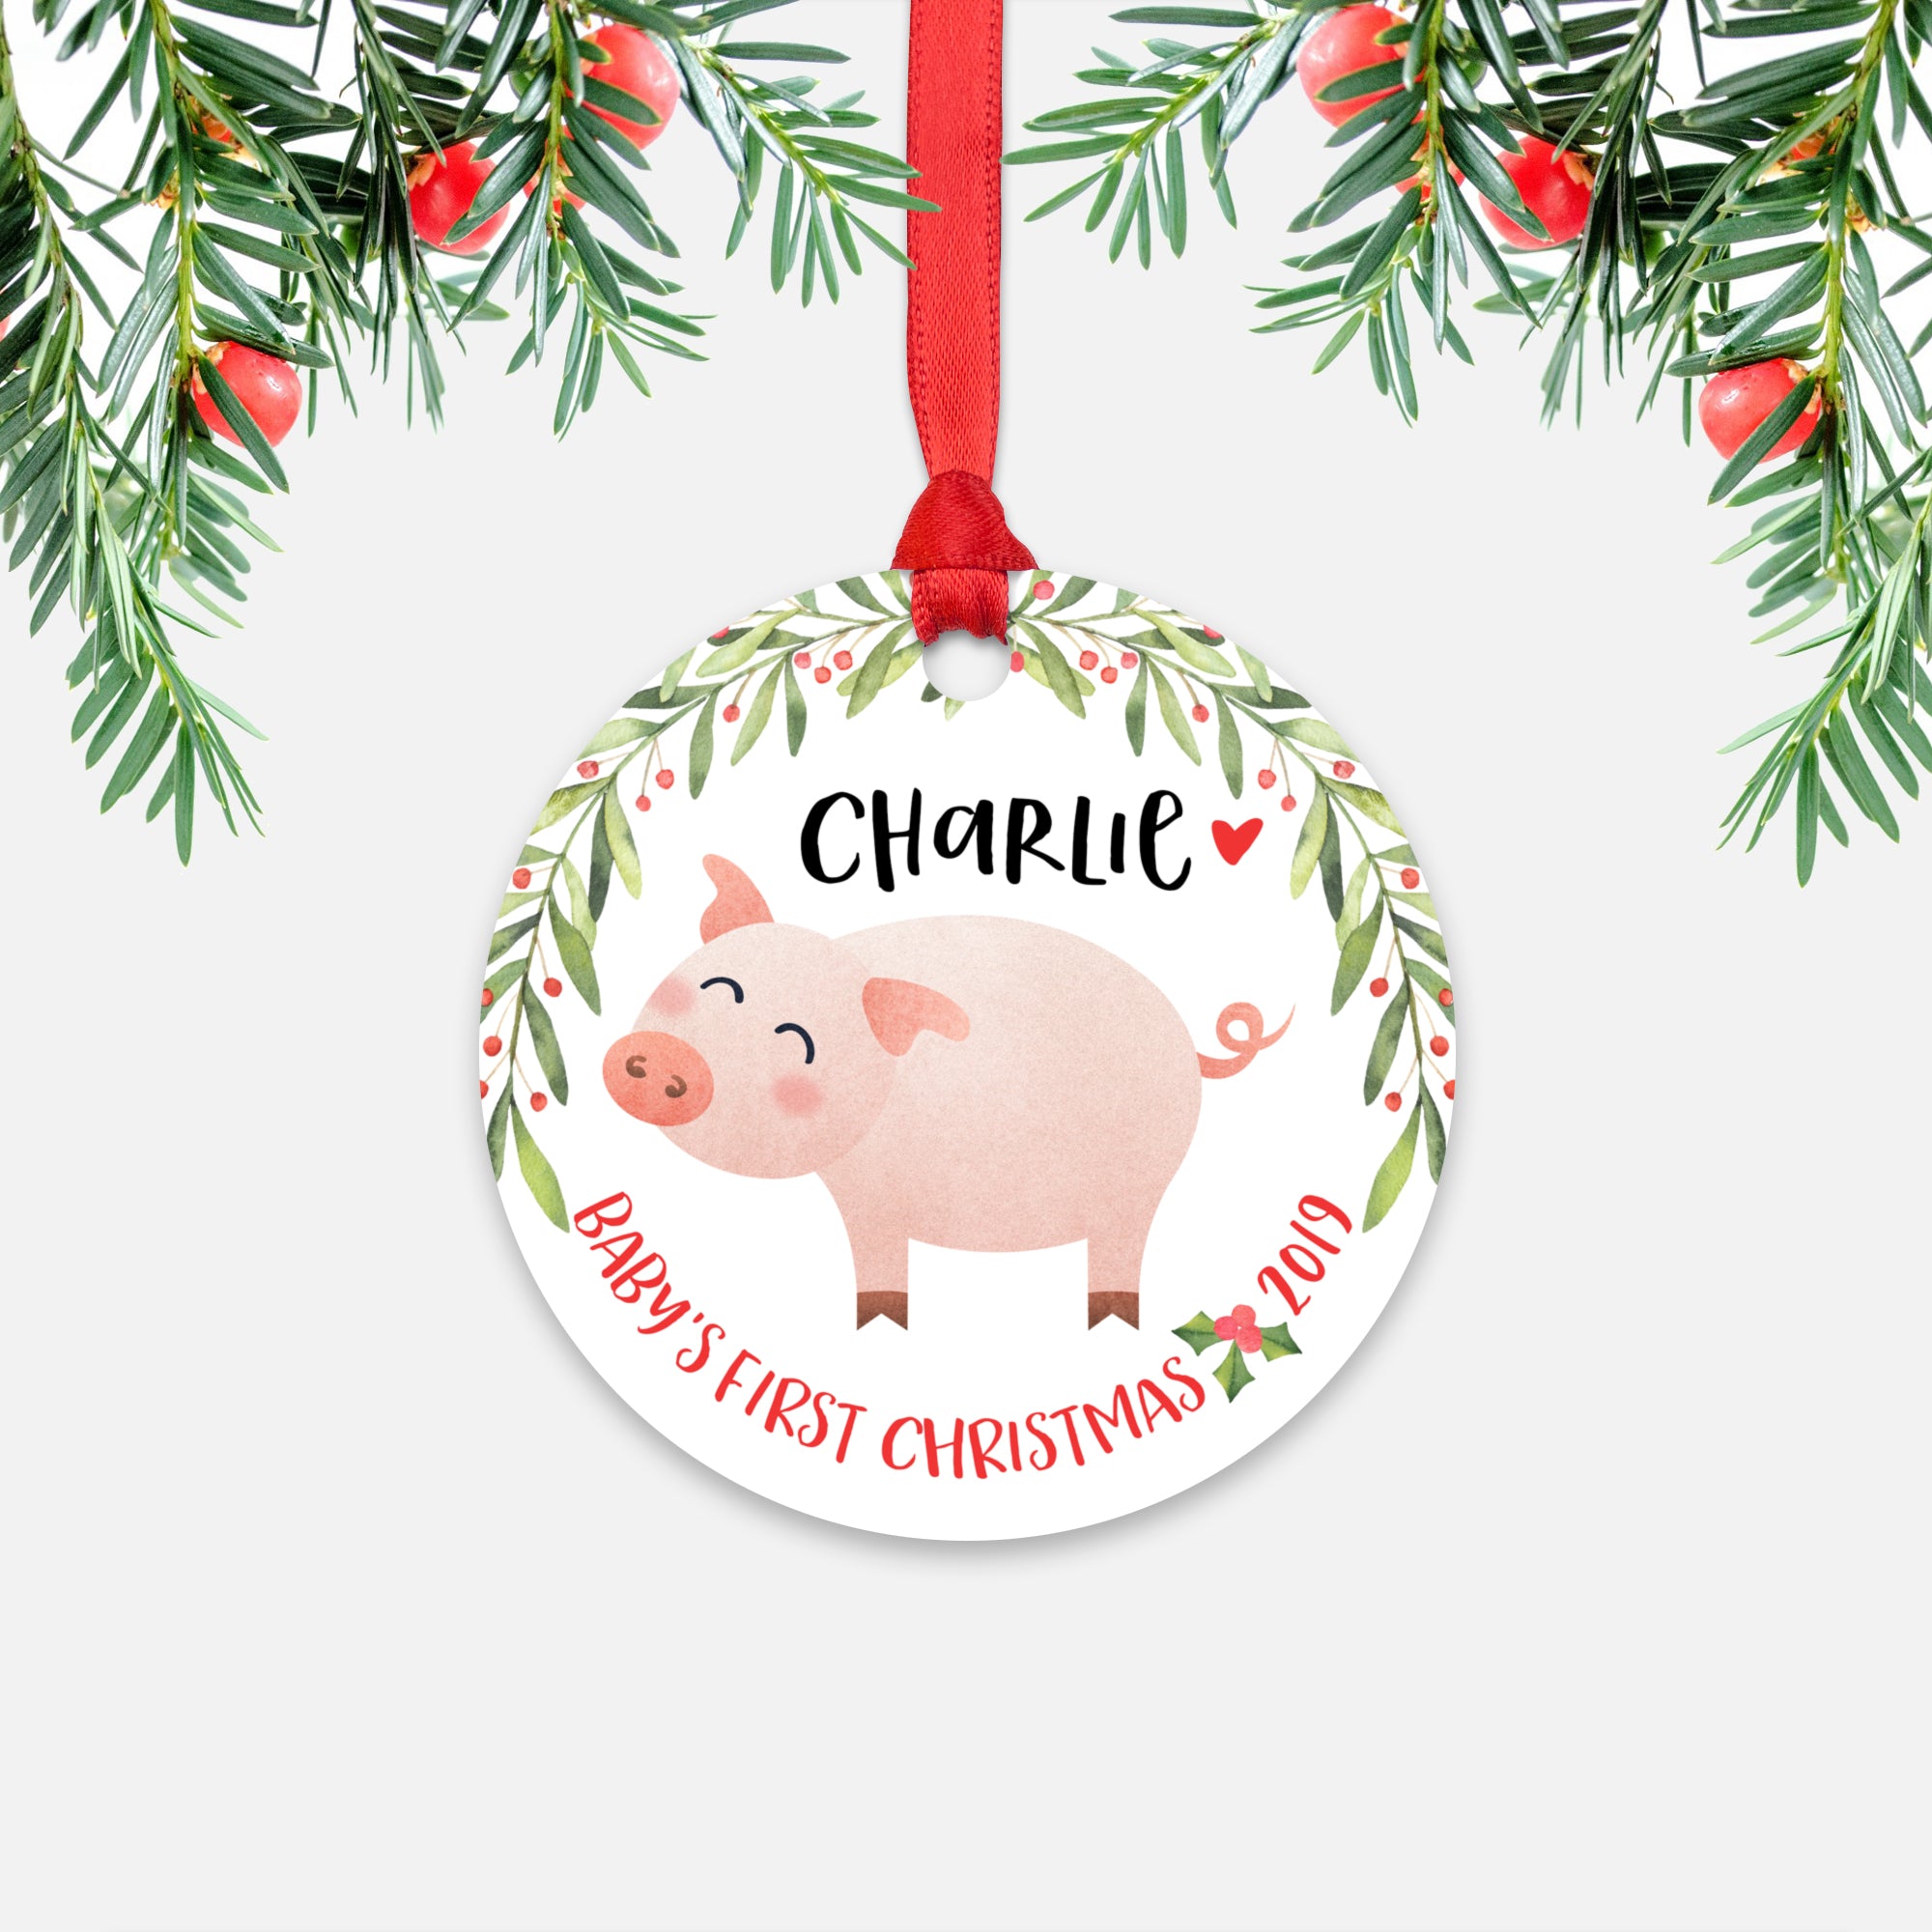 Pig Personalized Baby’s First Christmas Ornament for Baby Boy or Baby Girl - Cute Farm Animal Baby 1st Holidays Decoration - Custom Christmas Gift Idea for New Parents - Round Aluminum - by Happy Cat Prints